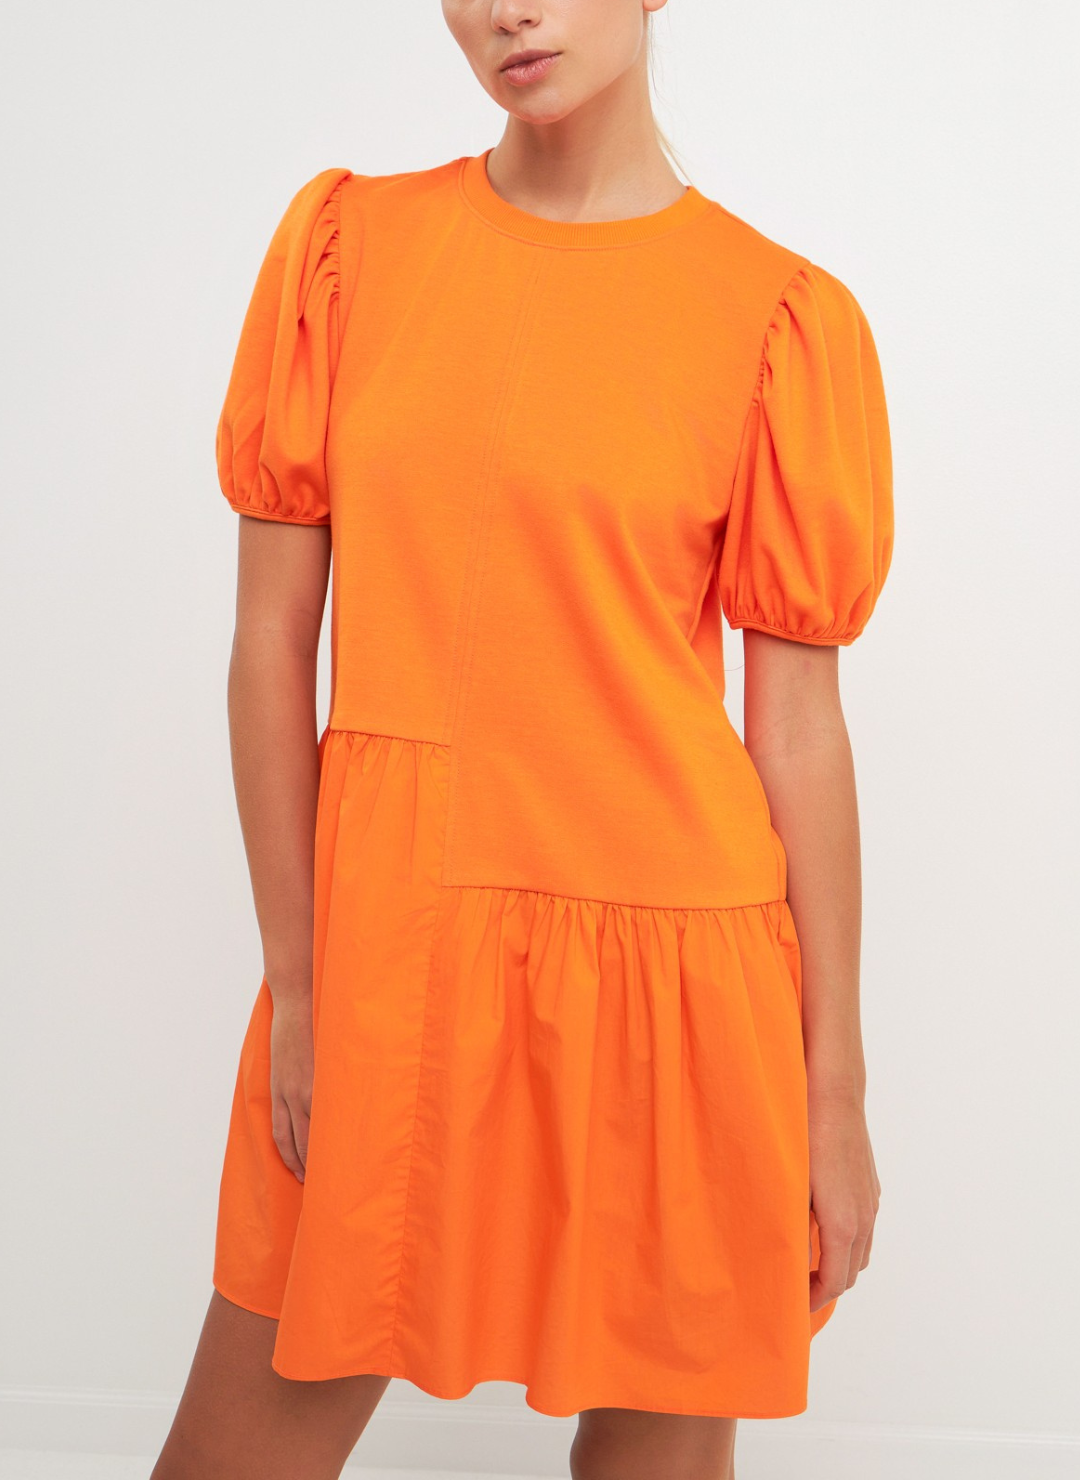 Model wearing Orangesicle Delight Dress with short puffy sleeves, knit bodice, cotton poplin skirt, and uneven front seam at the waist. White background.